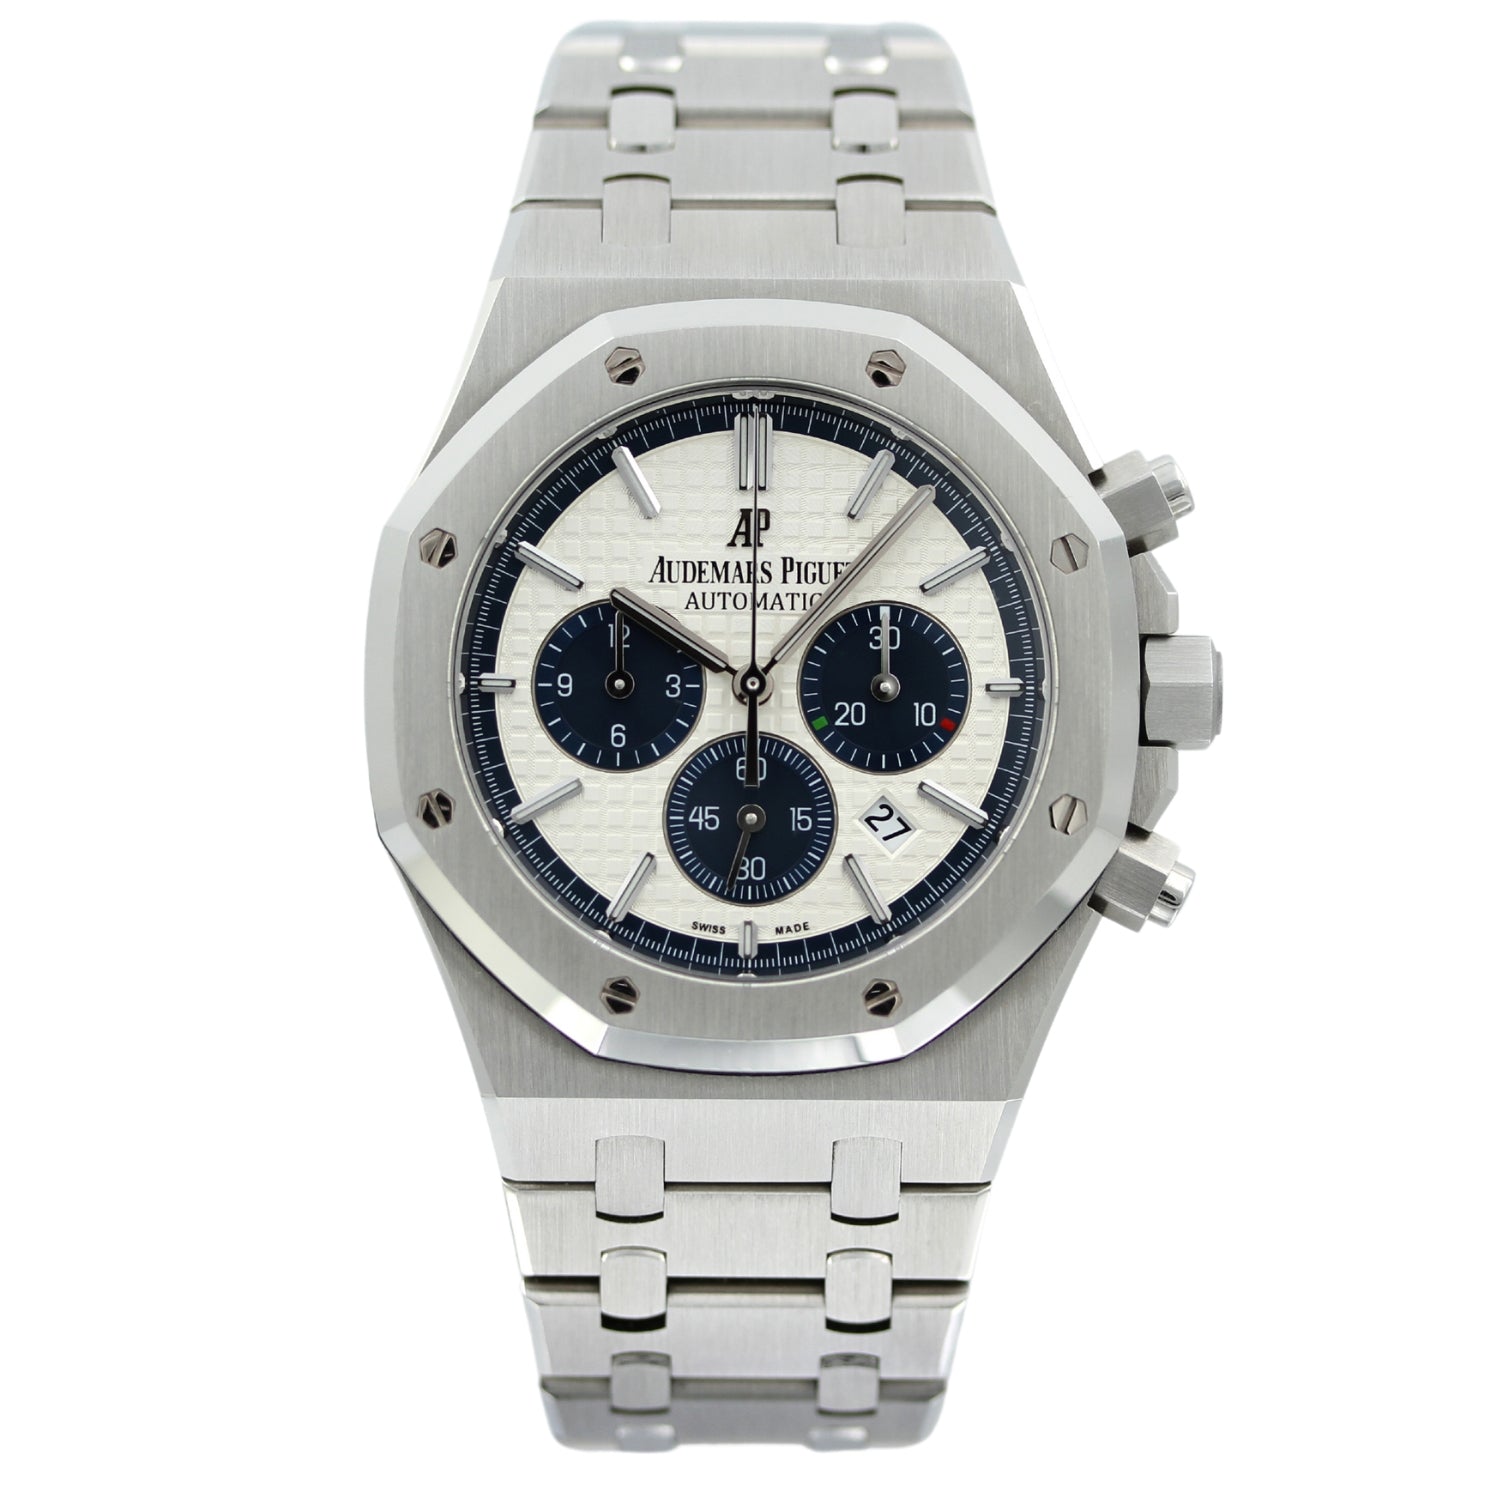 Audemars Piguet Royal Oak Chronograph 41mm, Tribute to Italy, Limited Editon 500 pc., Ref. 26326ST.OO.D027CA.01, 2016, B+P - LUXUHRIA